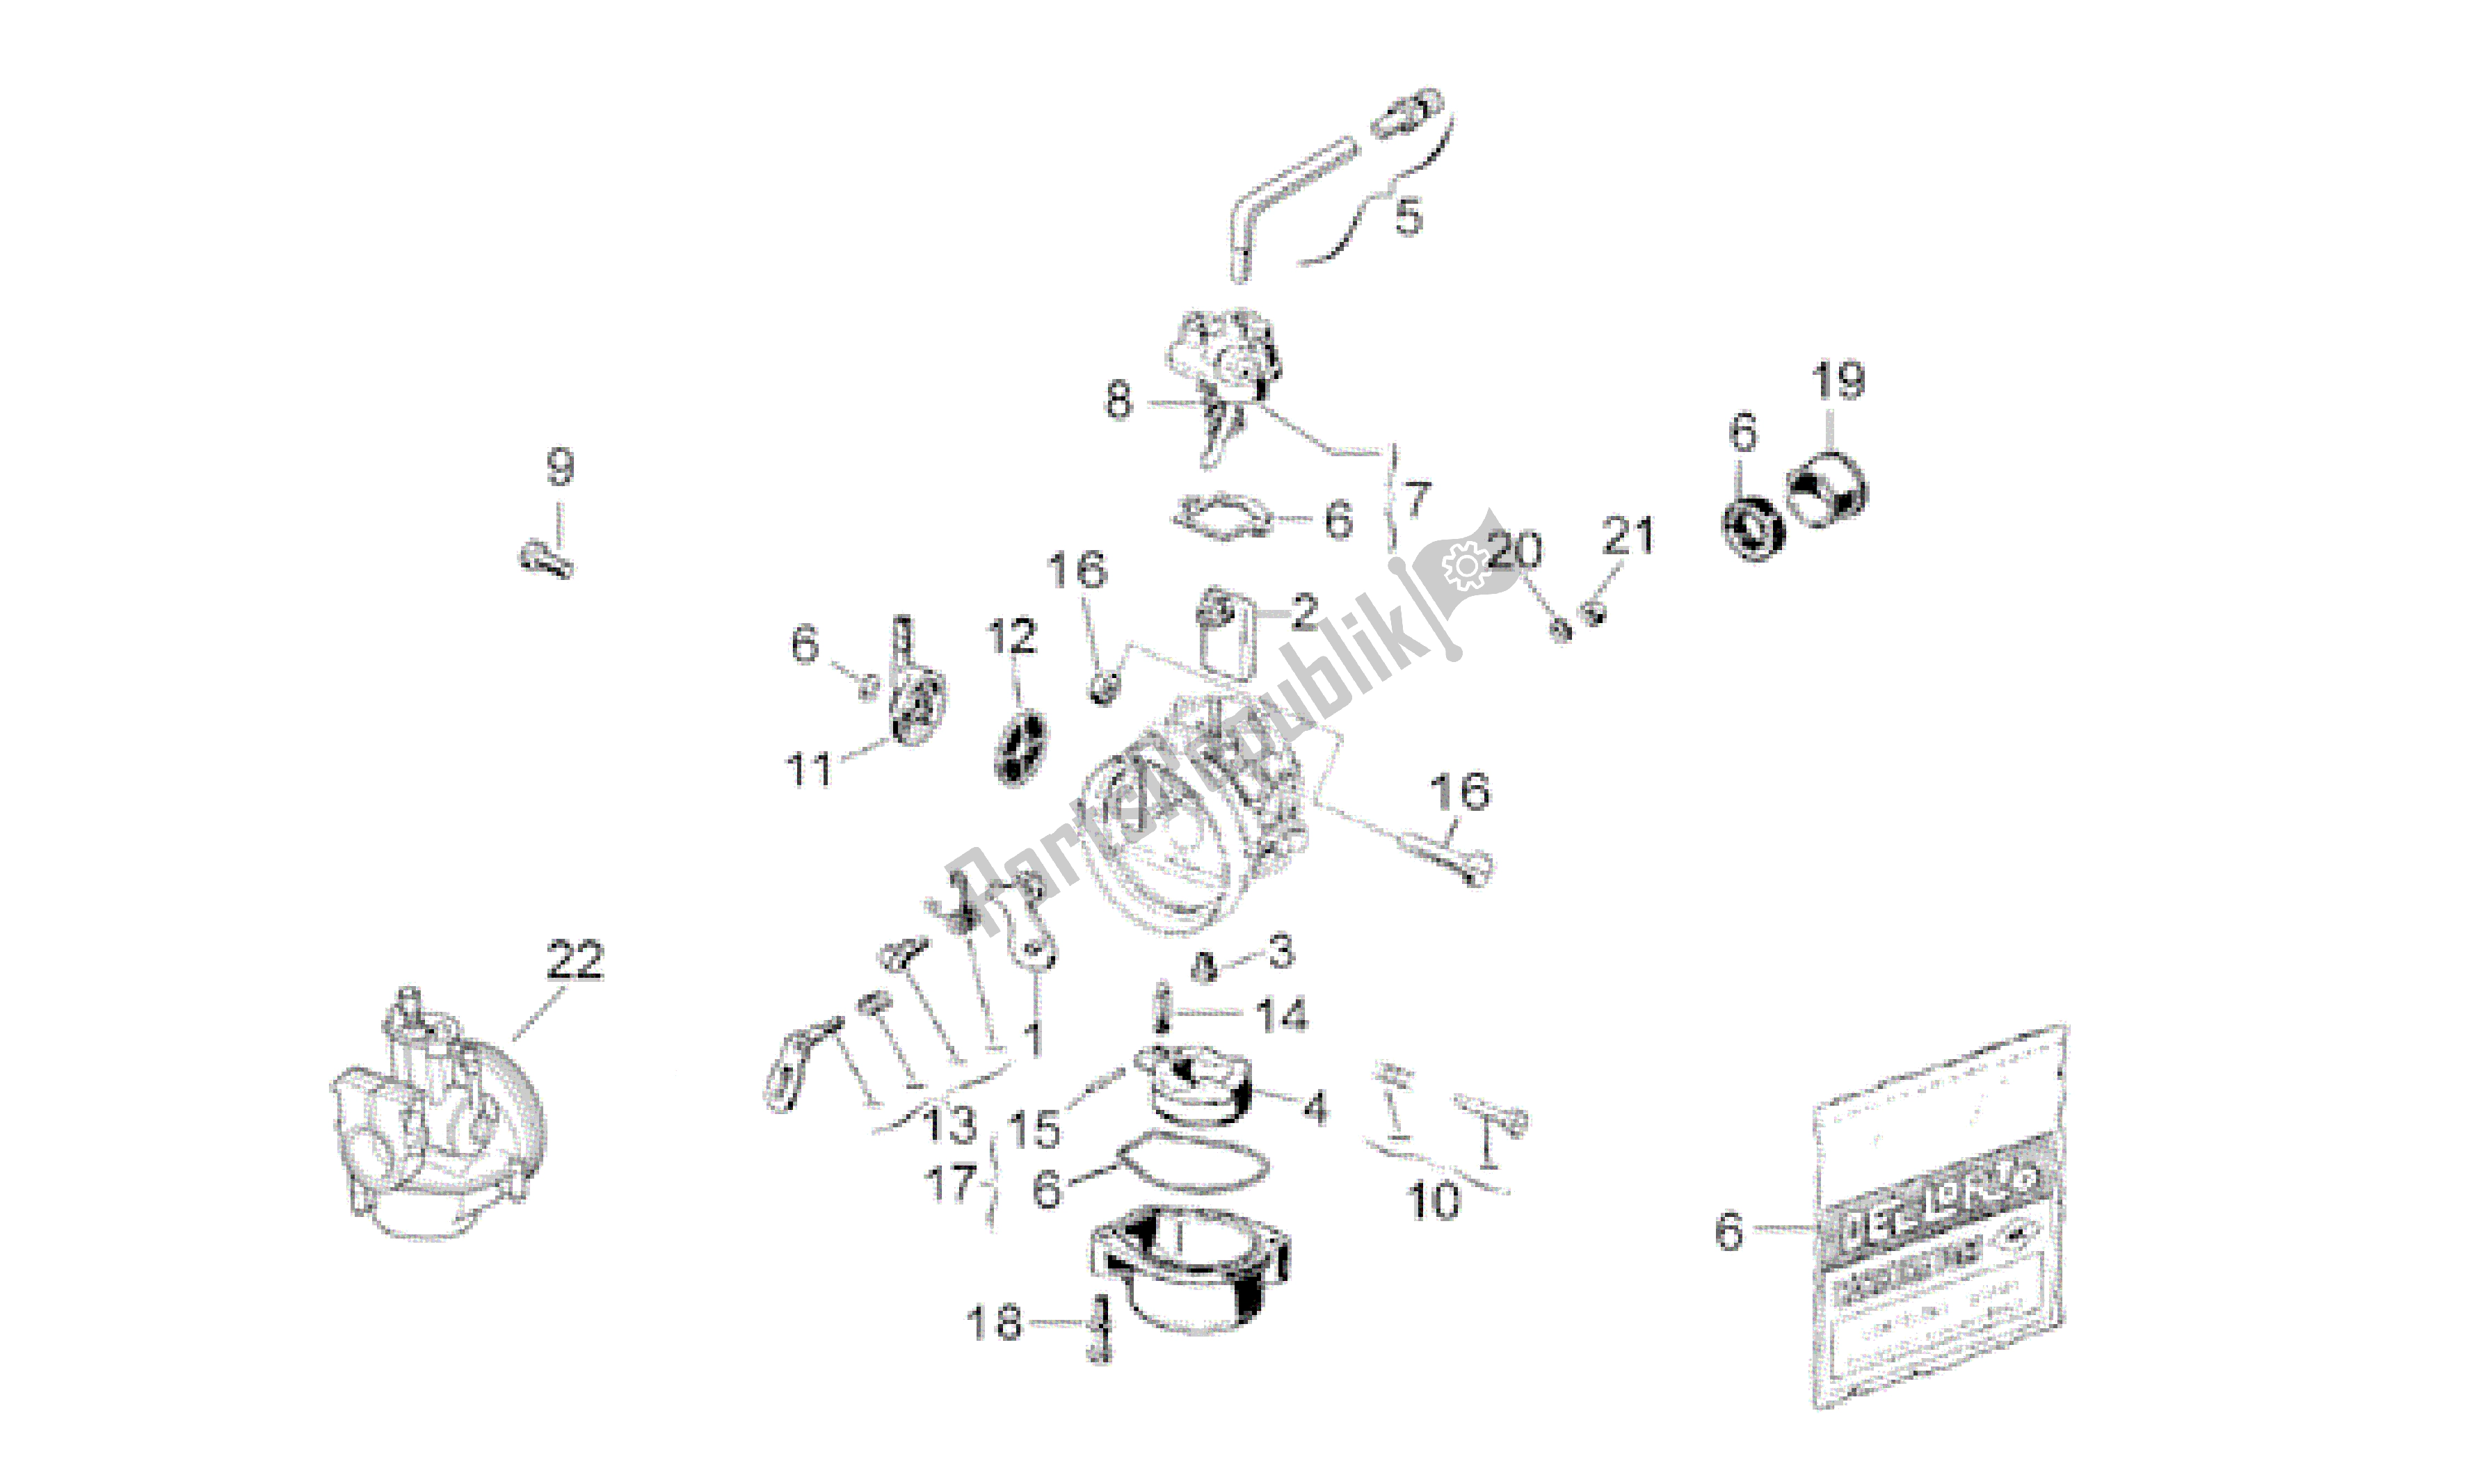 All parts for the Carburettor - Pg of the Aprilia RS 50 1999 - 2005